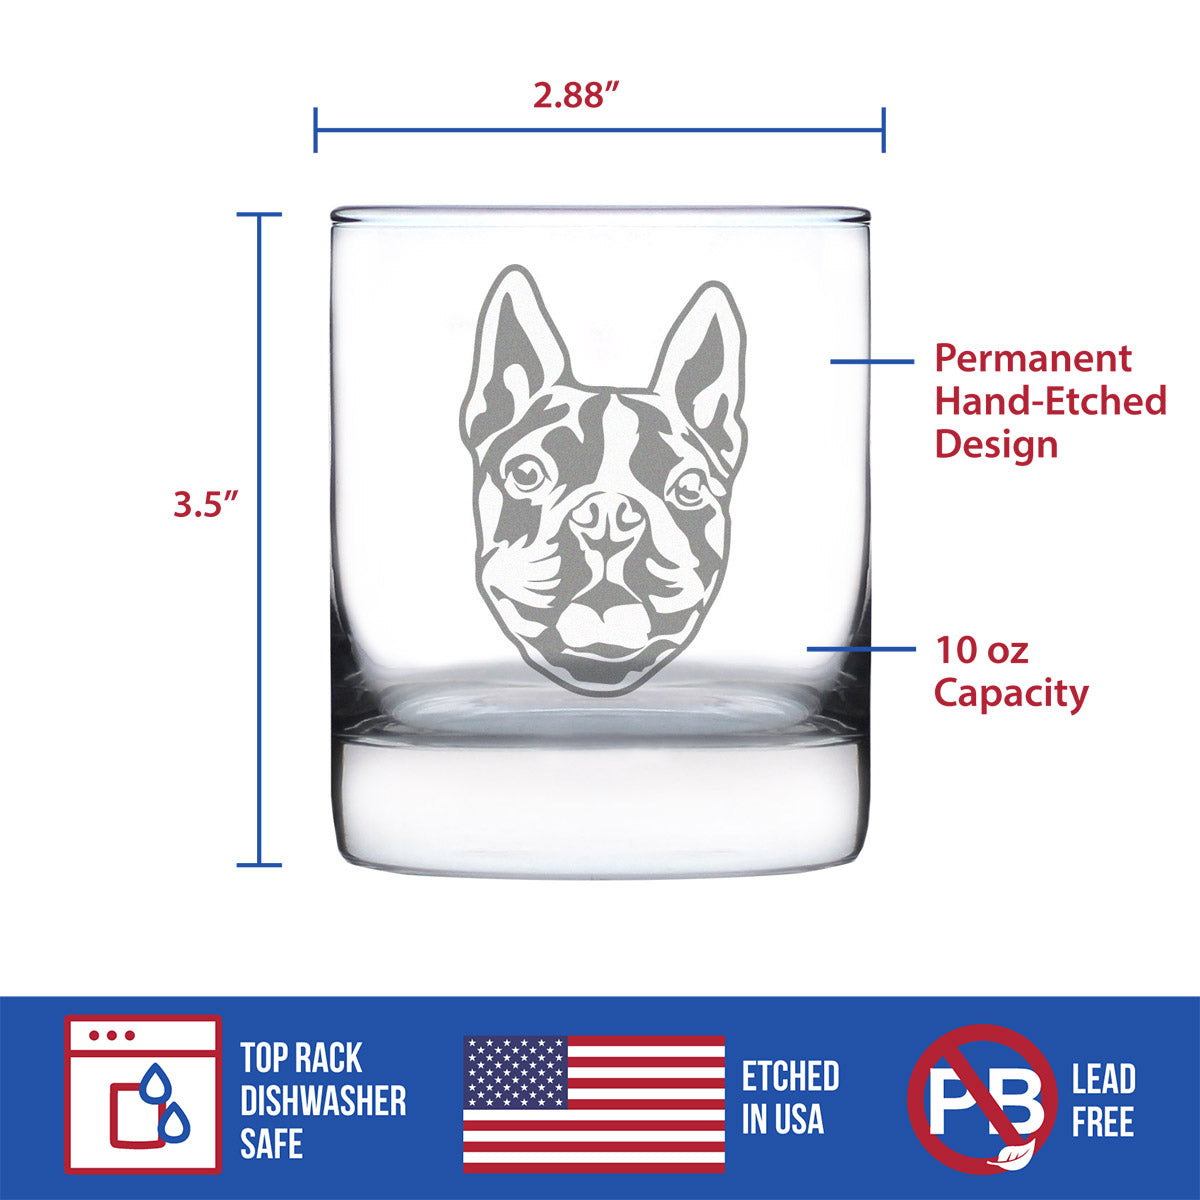 Boston Terrier Face Whiskey Rocks Glass - Unique Dog Themed Decor and Gifts for Moms &amp; Dads of Boston Terriers - 10.25 Oz